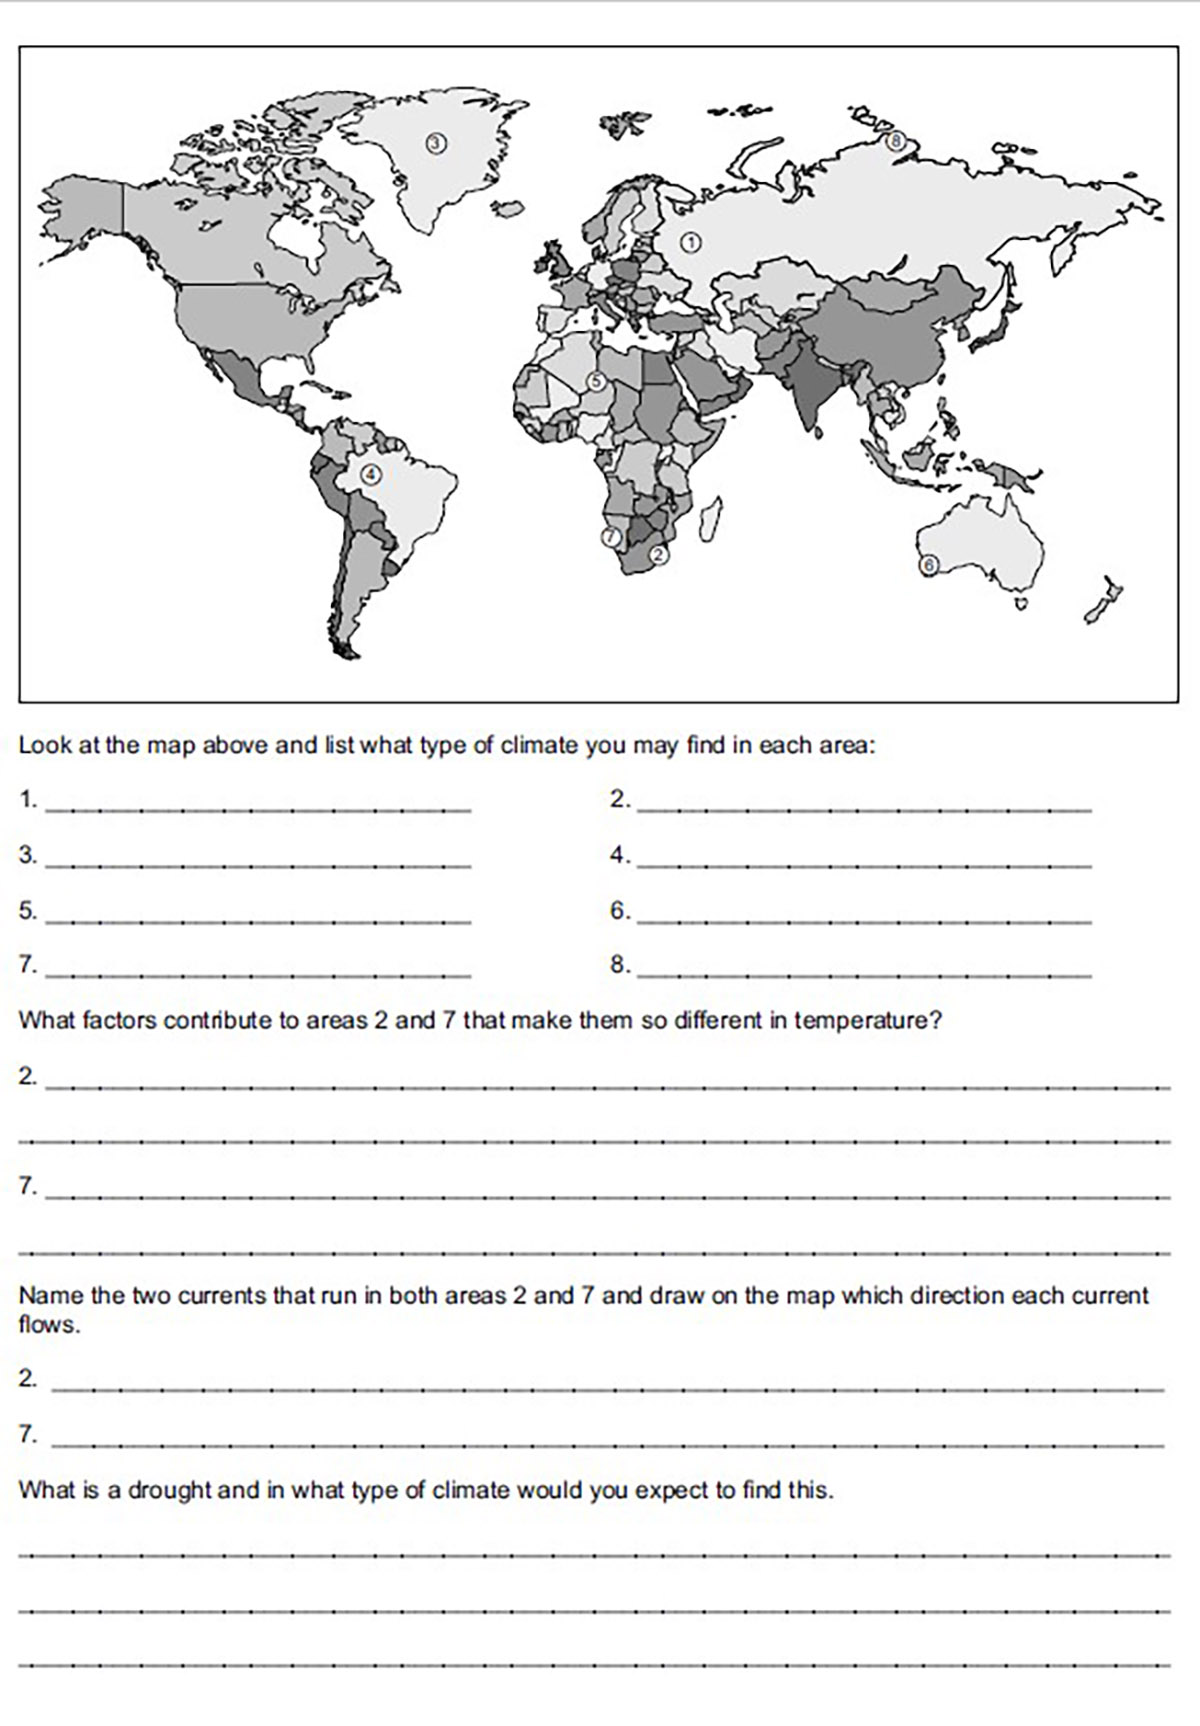 oceans-and-continents-worksheet-teaching-resources-year-7-geography